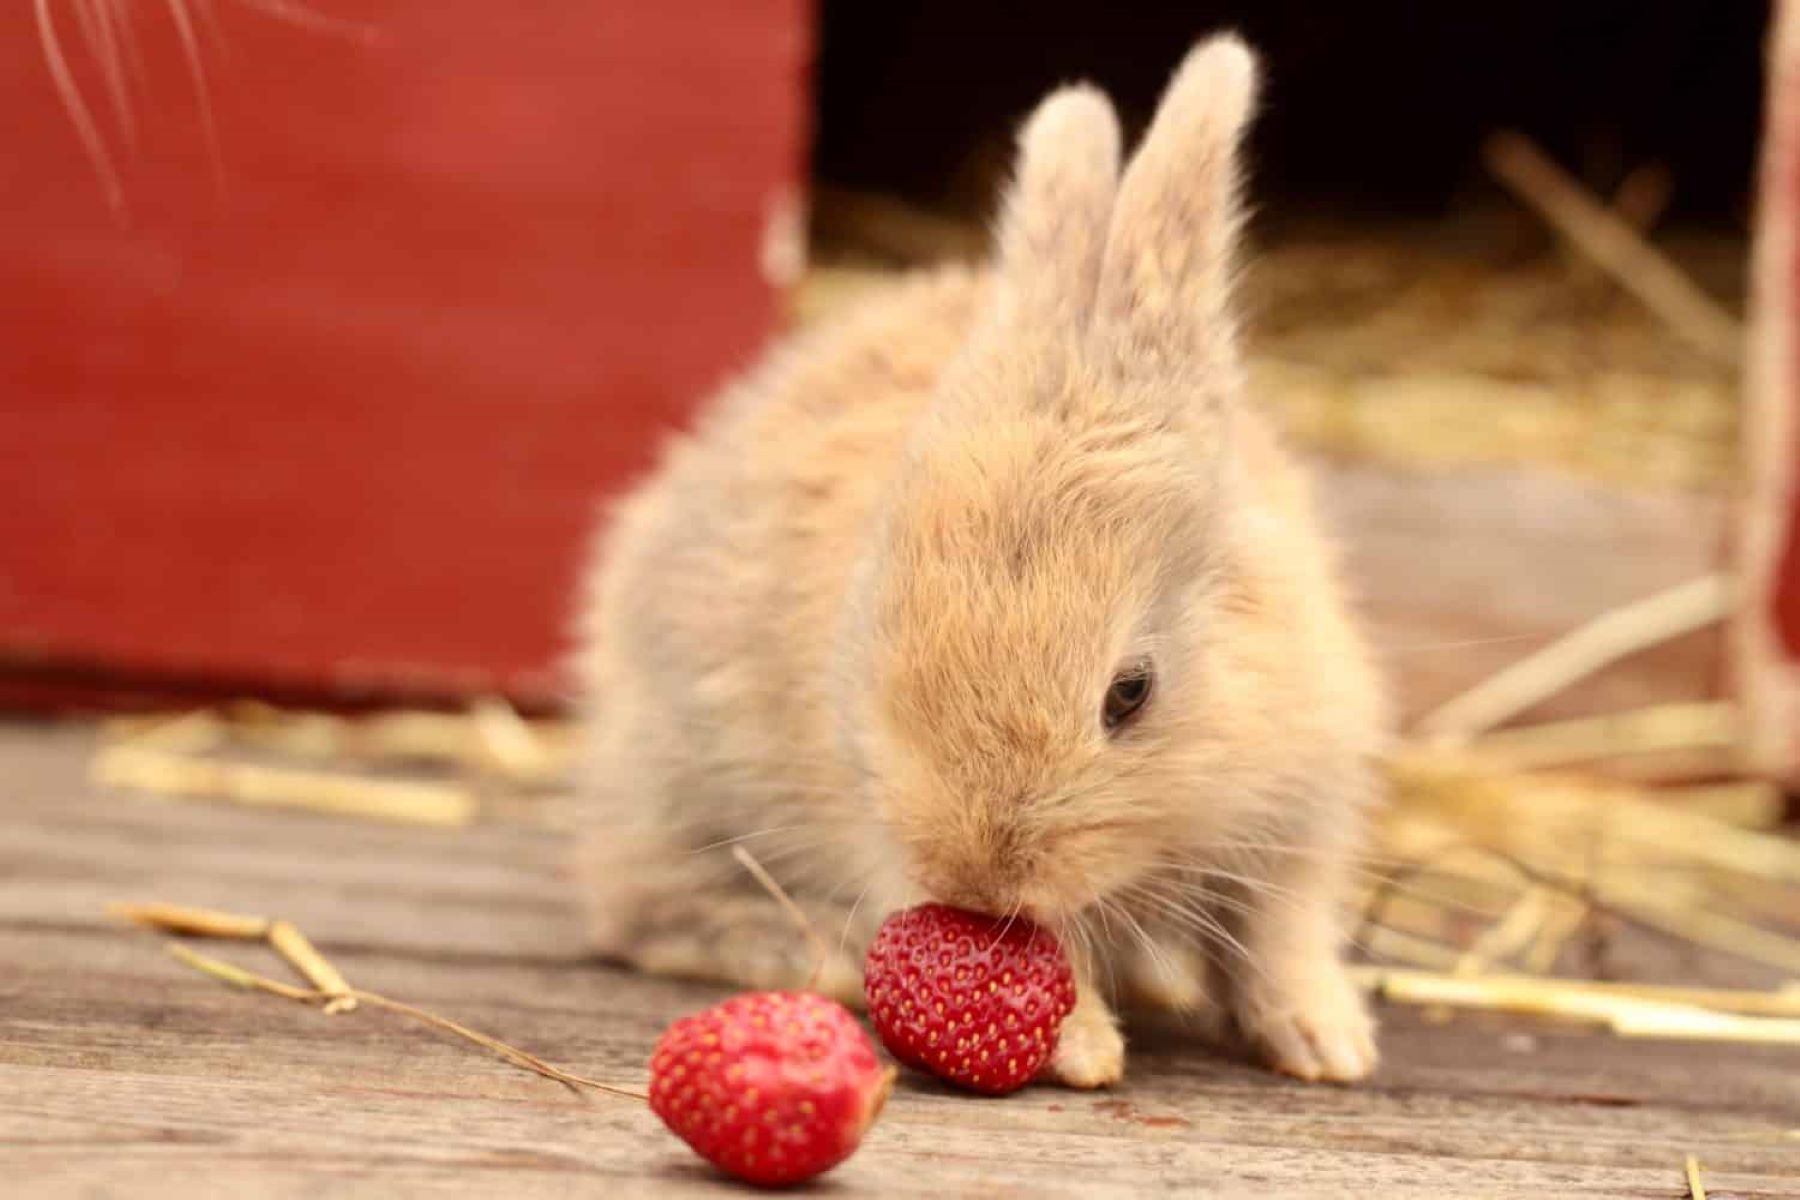 Discover The Surprising Truth: Can Rabbits Eat Strawberries? Find Out The Shocking Side Effects!